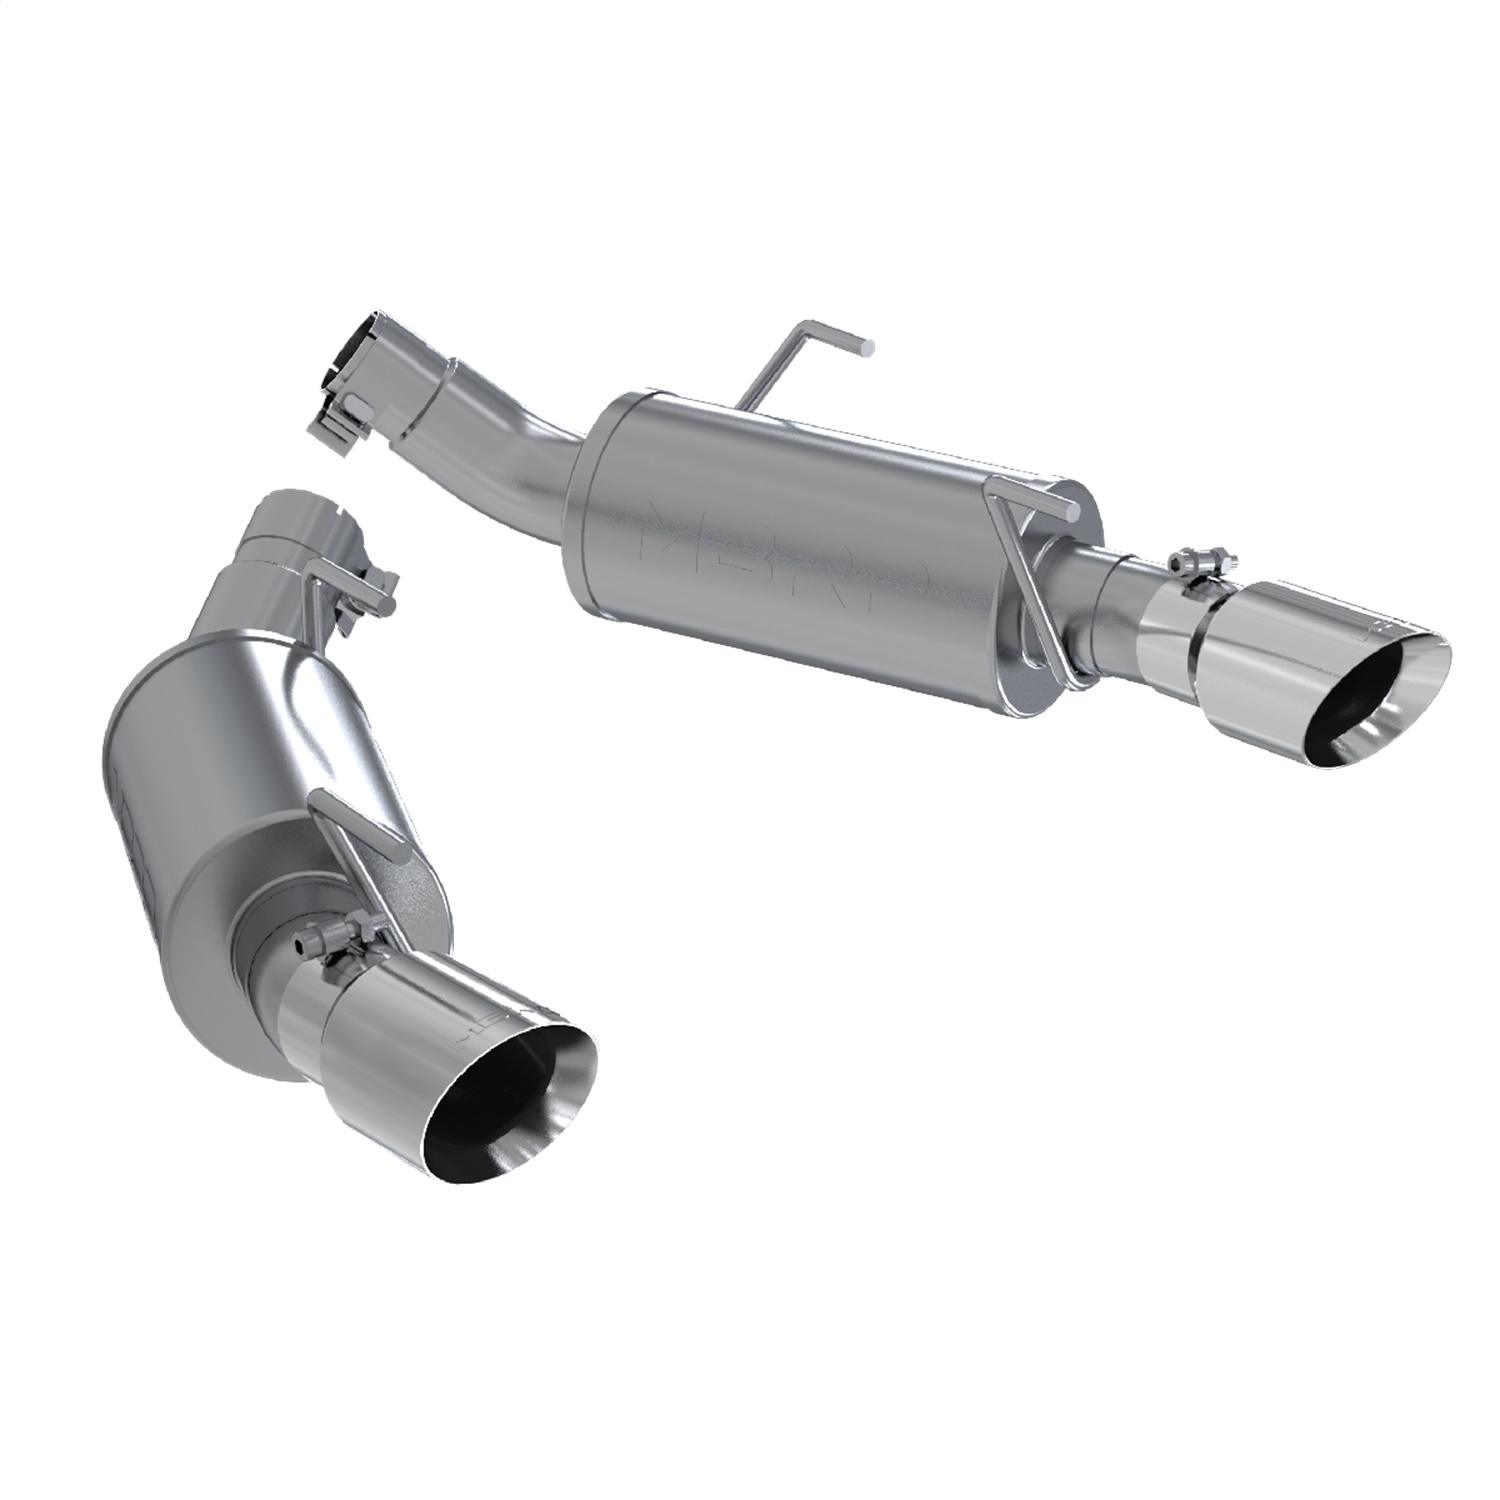 MBRP Exhaust MBRP Exhaust S7200304 Exhaust System Kit